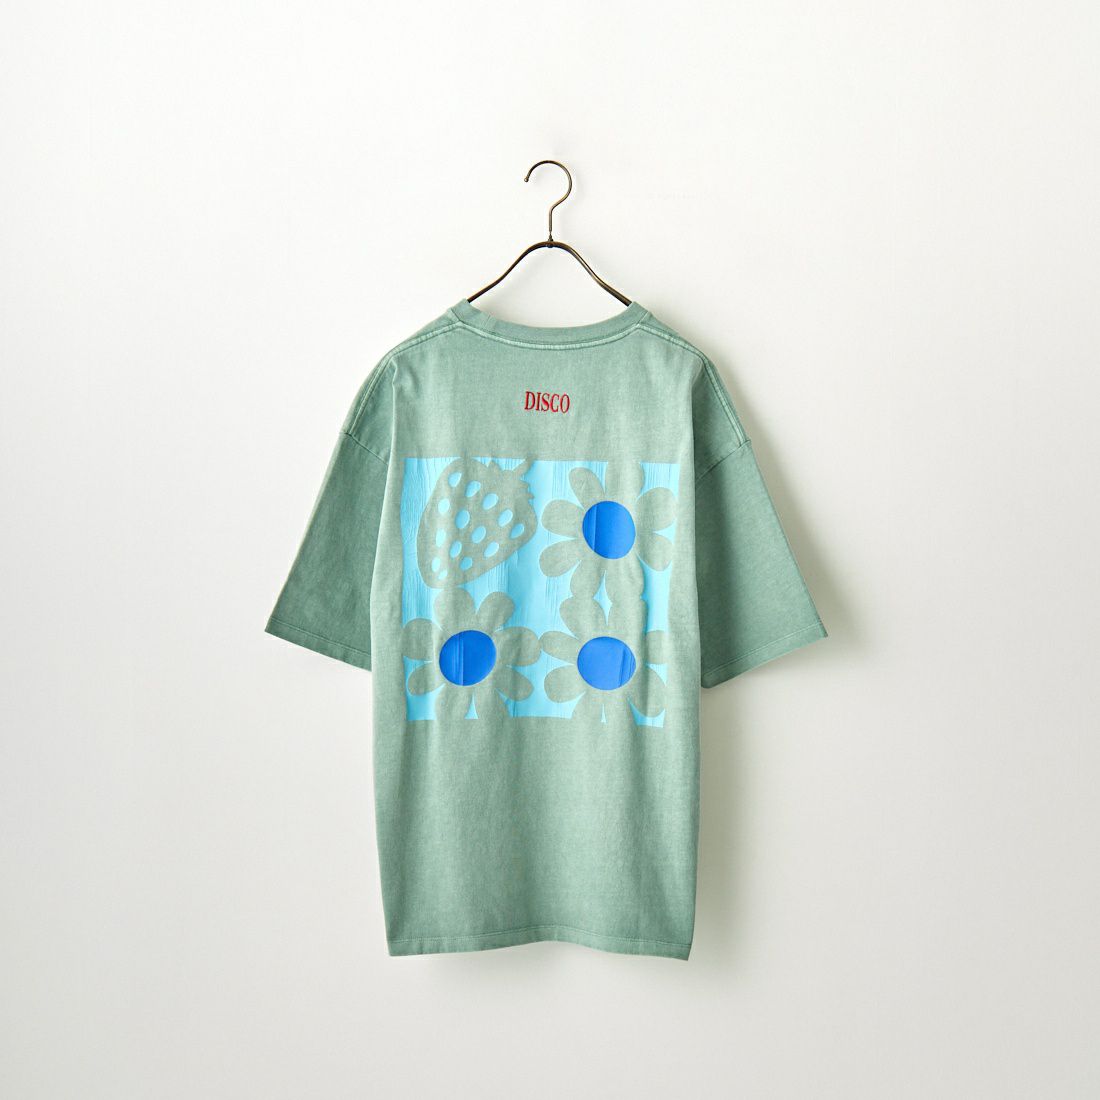 Jeans Factory Clothes [ジーンズファクトリークローズ] DISCOプリントTシャツ [2322-420IN-A] MINT